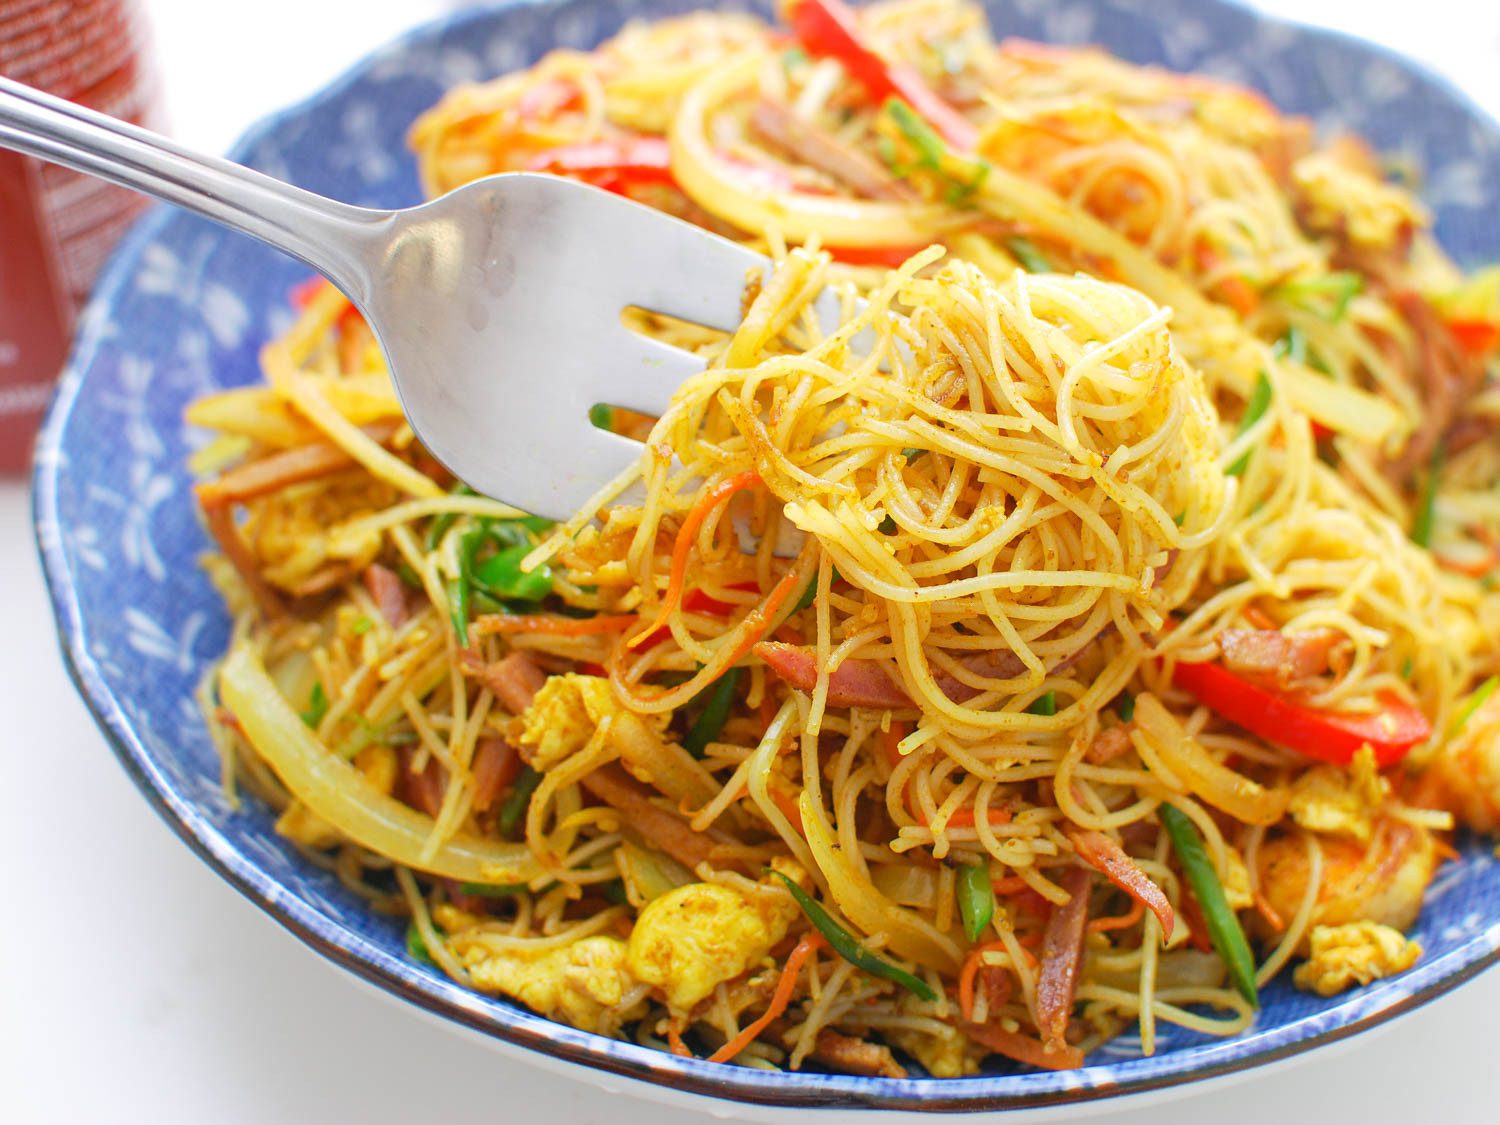 Singapore Fried Rice Noodles Awesome Singapore Style Stir Fried Rice Noodles for 2 Persons